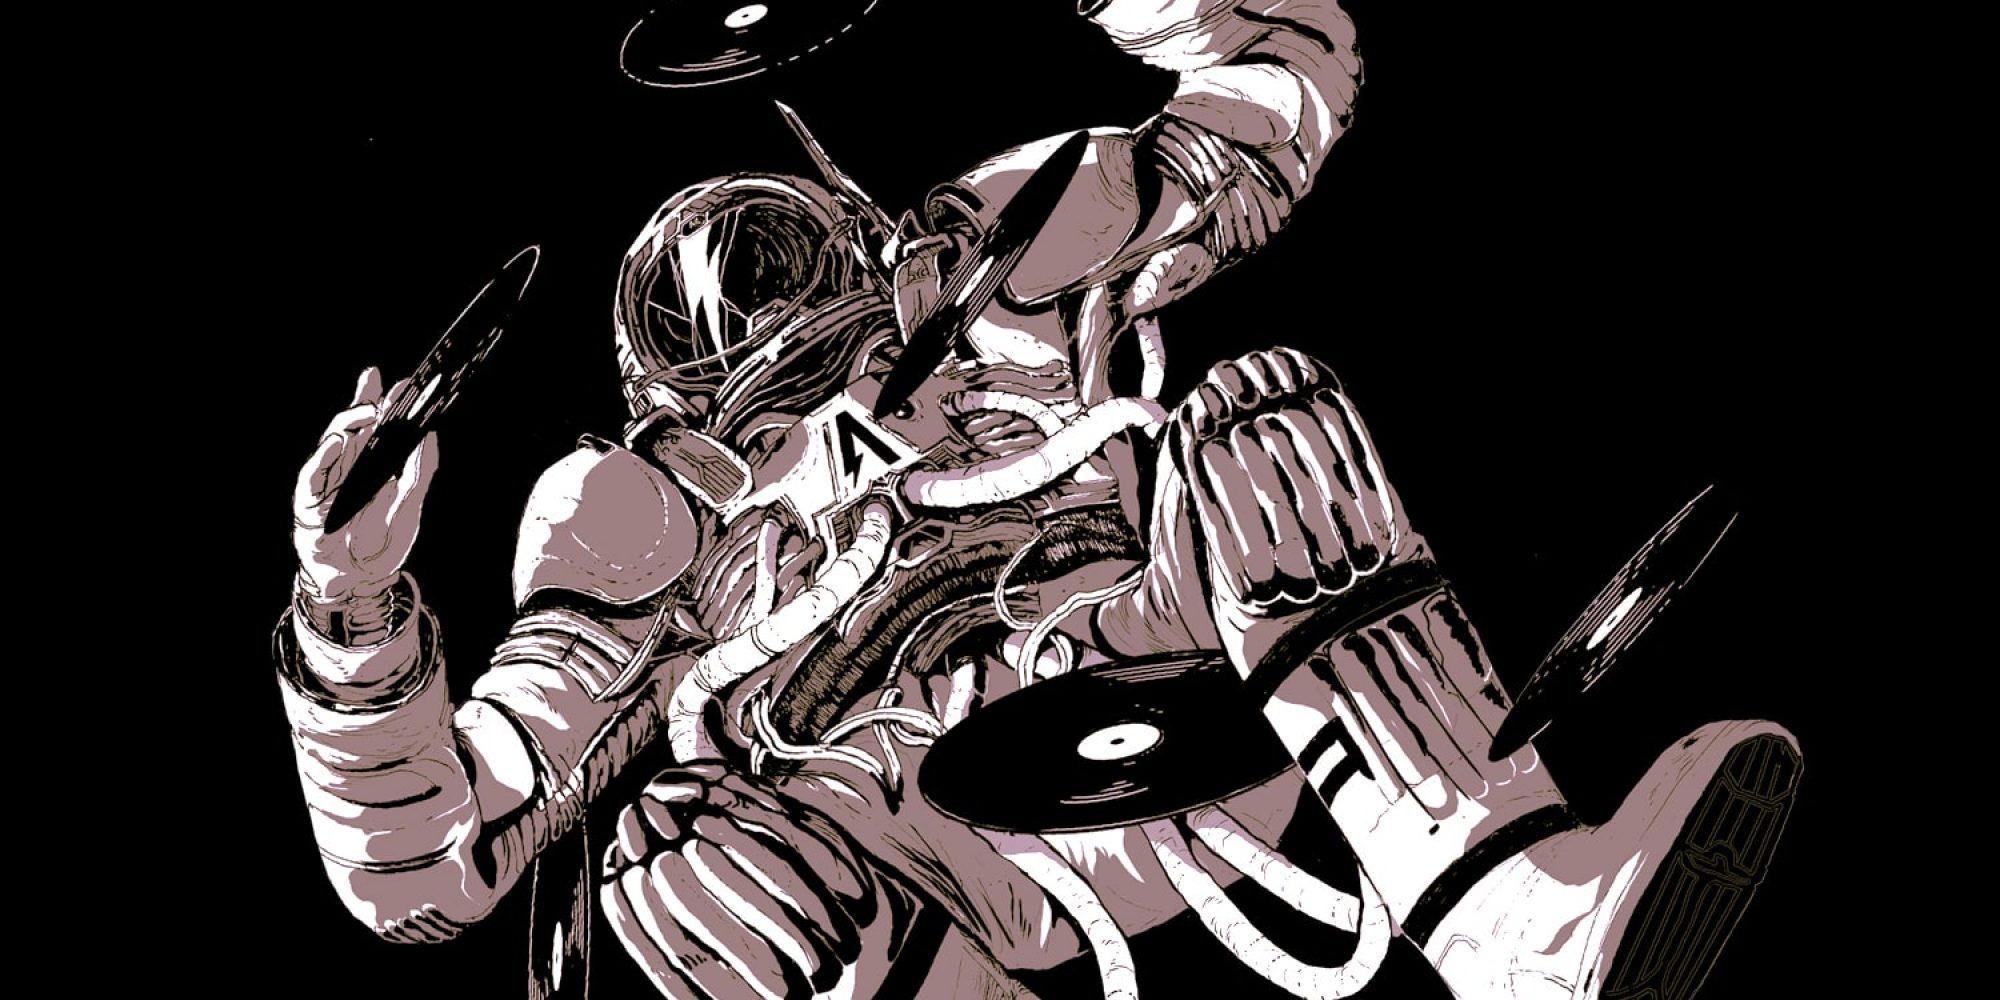 Illustrated in monochrome black and white. An astronaut floats in space surrounded by vinyl records.